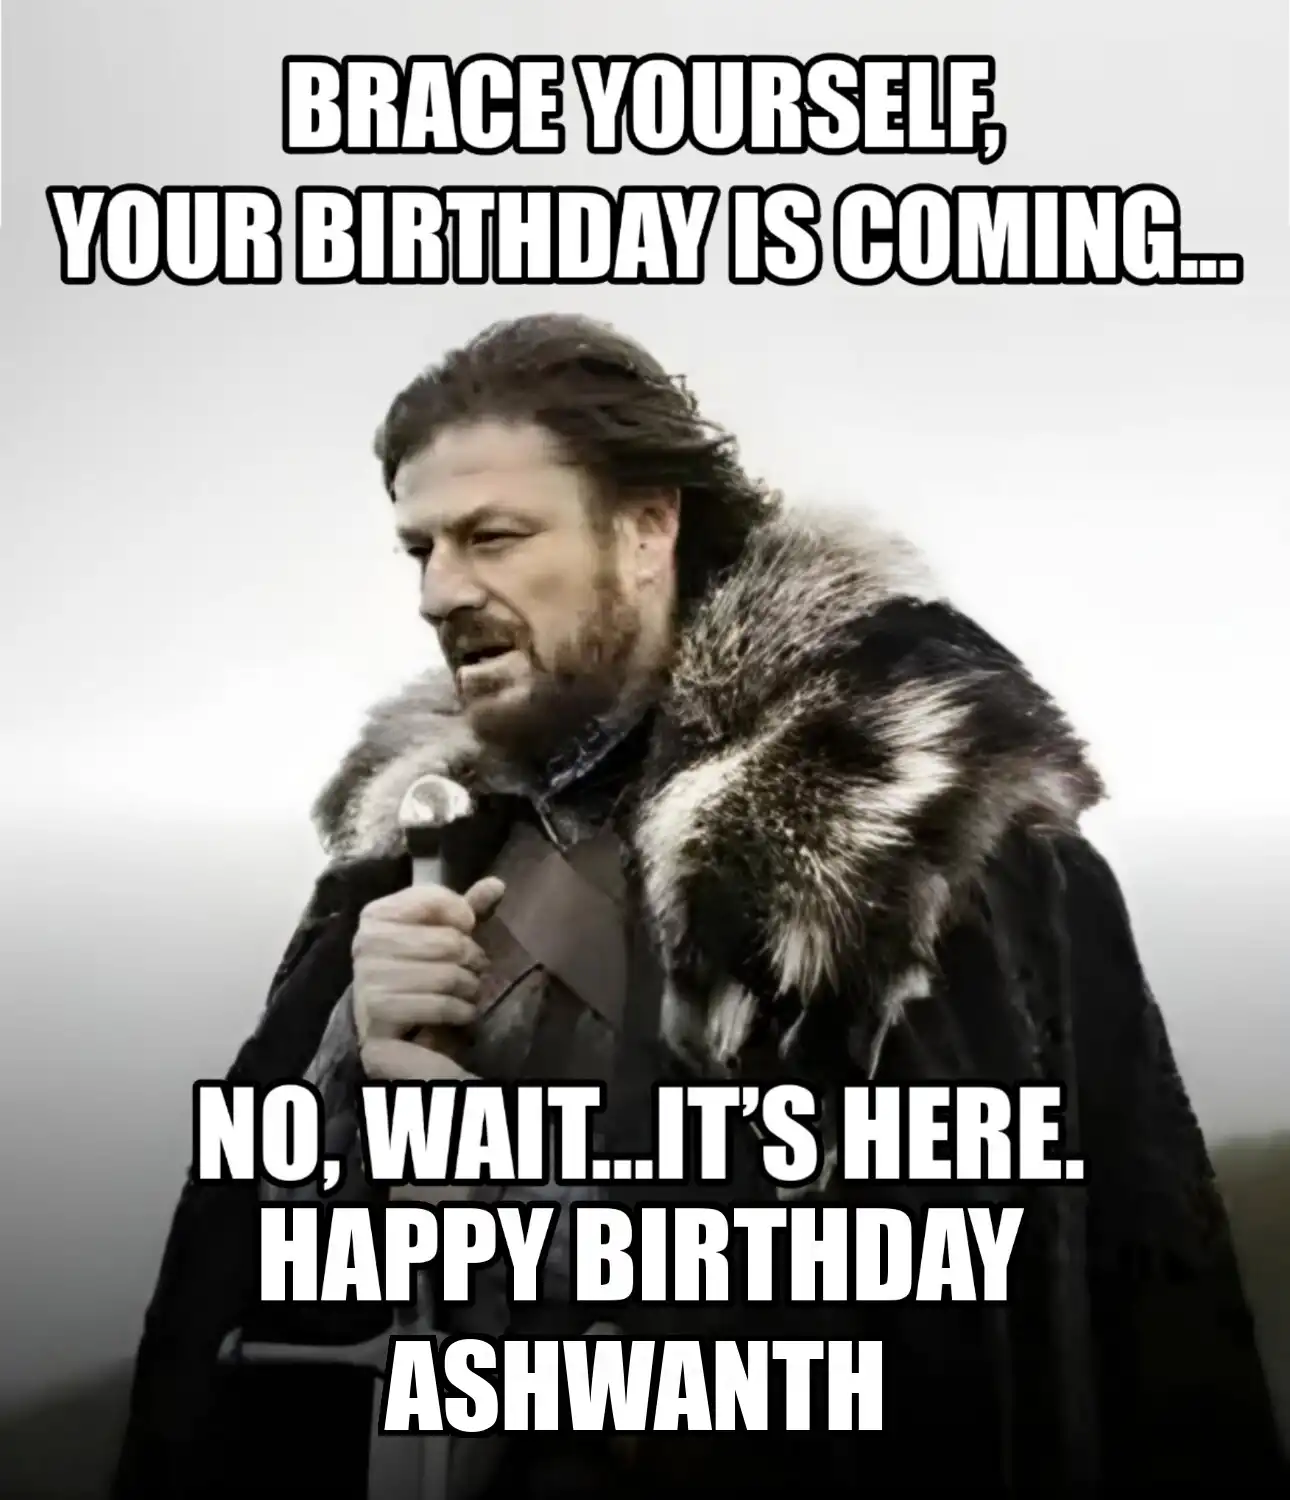 Happy Birthday Ashwanth Brace Yourself Your Birthday Is Coming Meme